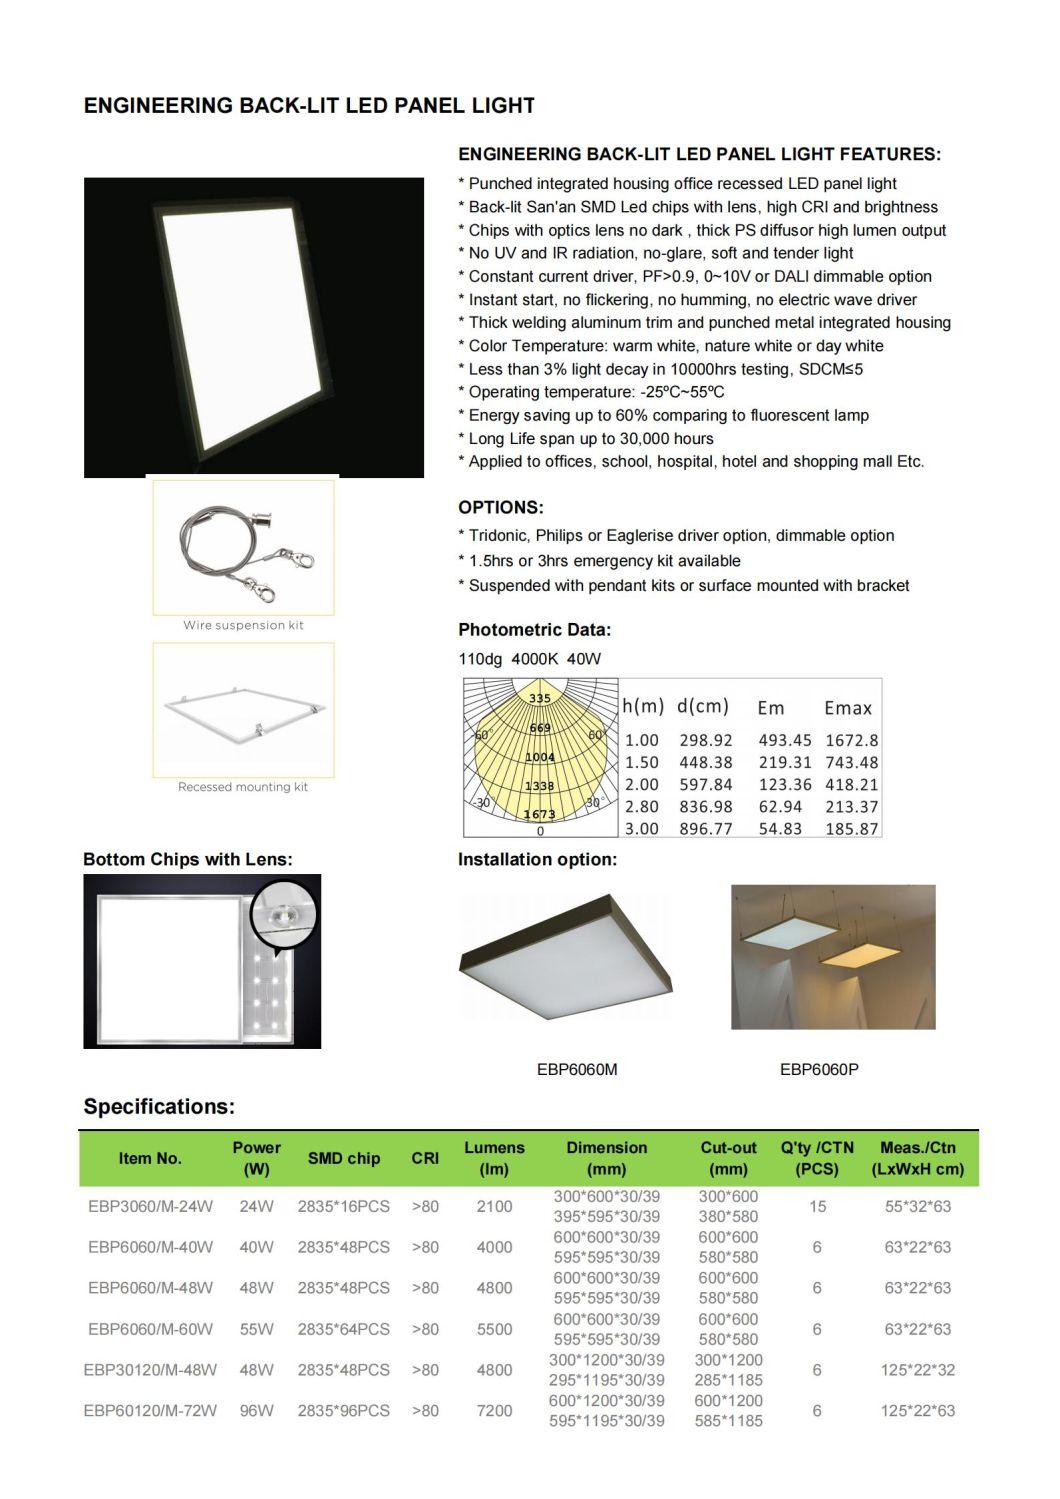 Engineering Back-Lit 600*600 Surface Ceiling Mounted LED Panel Light for Office, School, Bank, Shopping Mall Projects